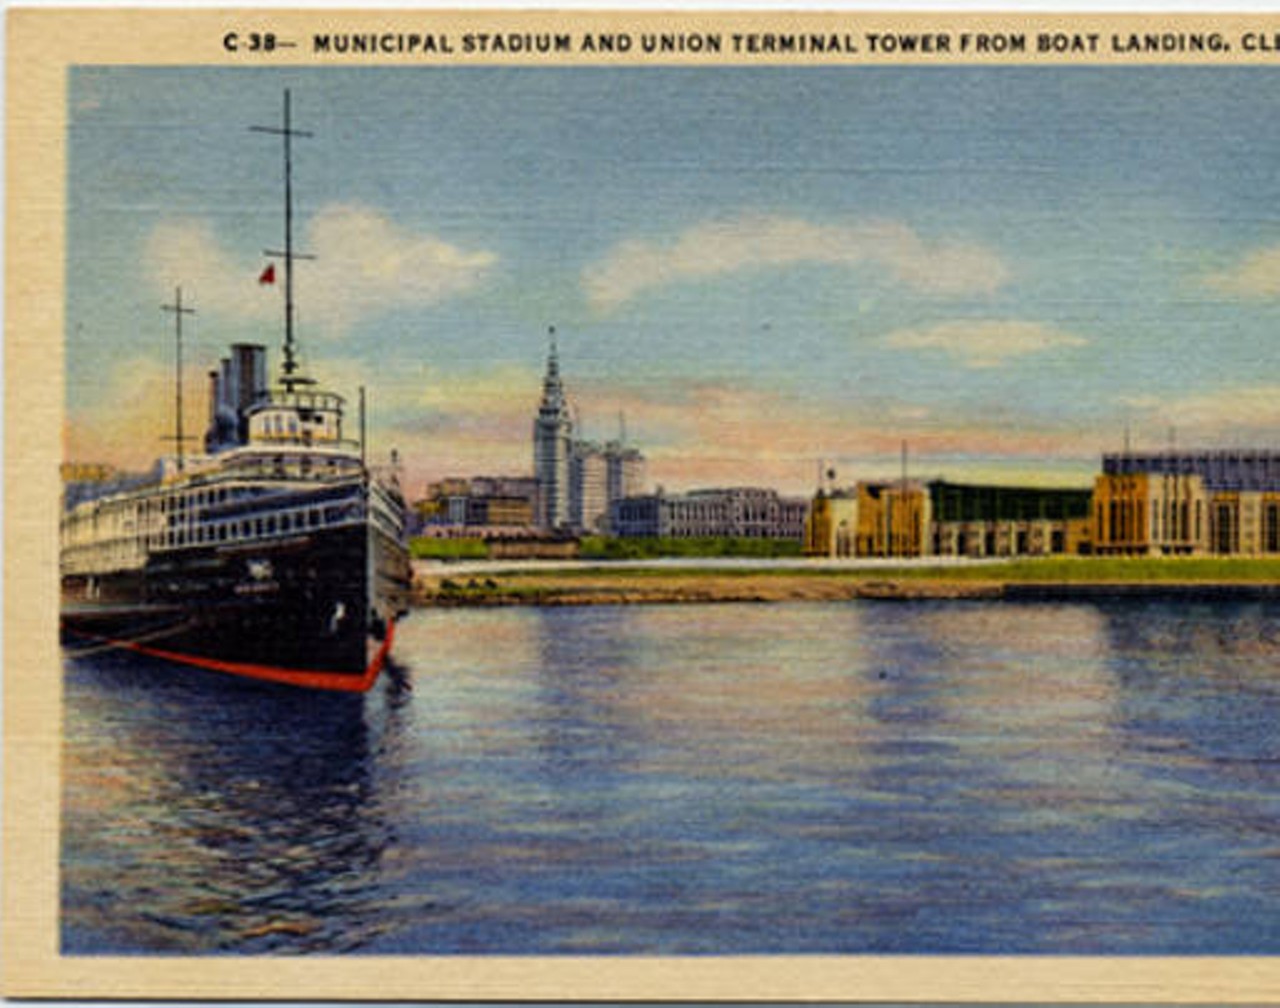 Cleveland's Municipal Stadium from the Lake Erie side